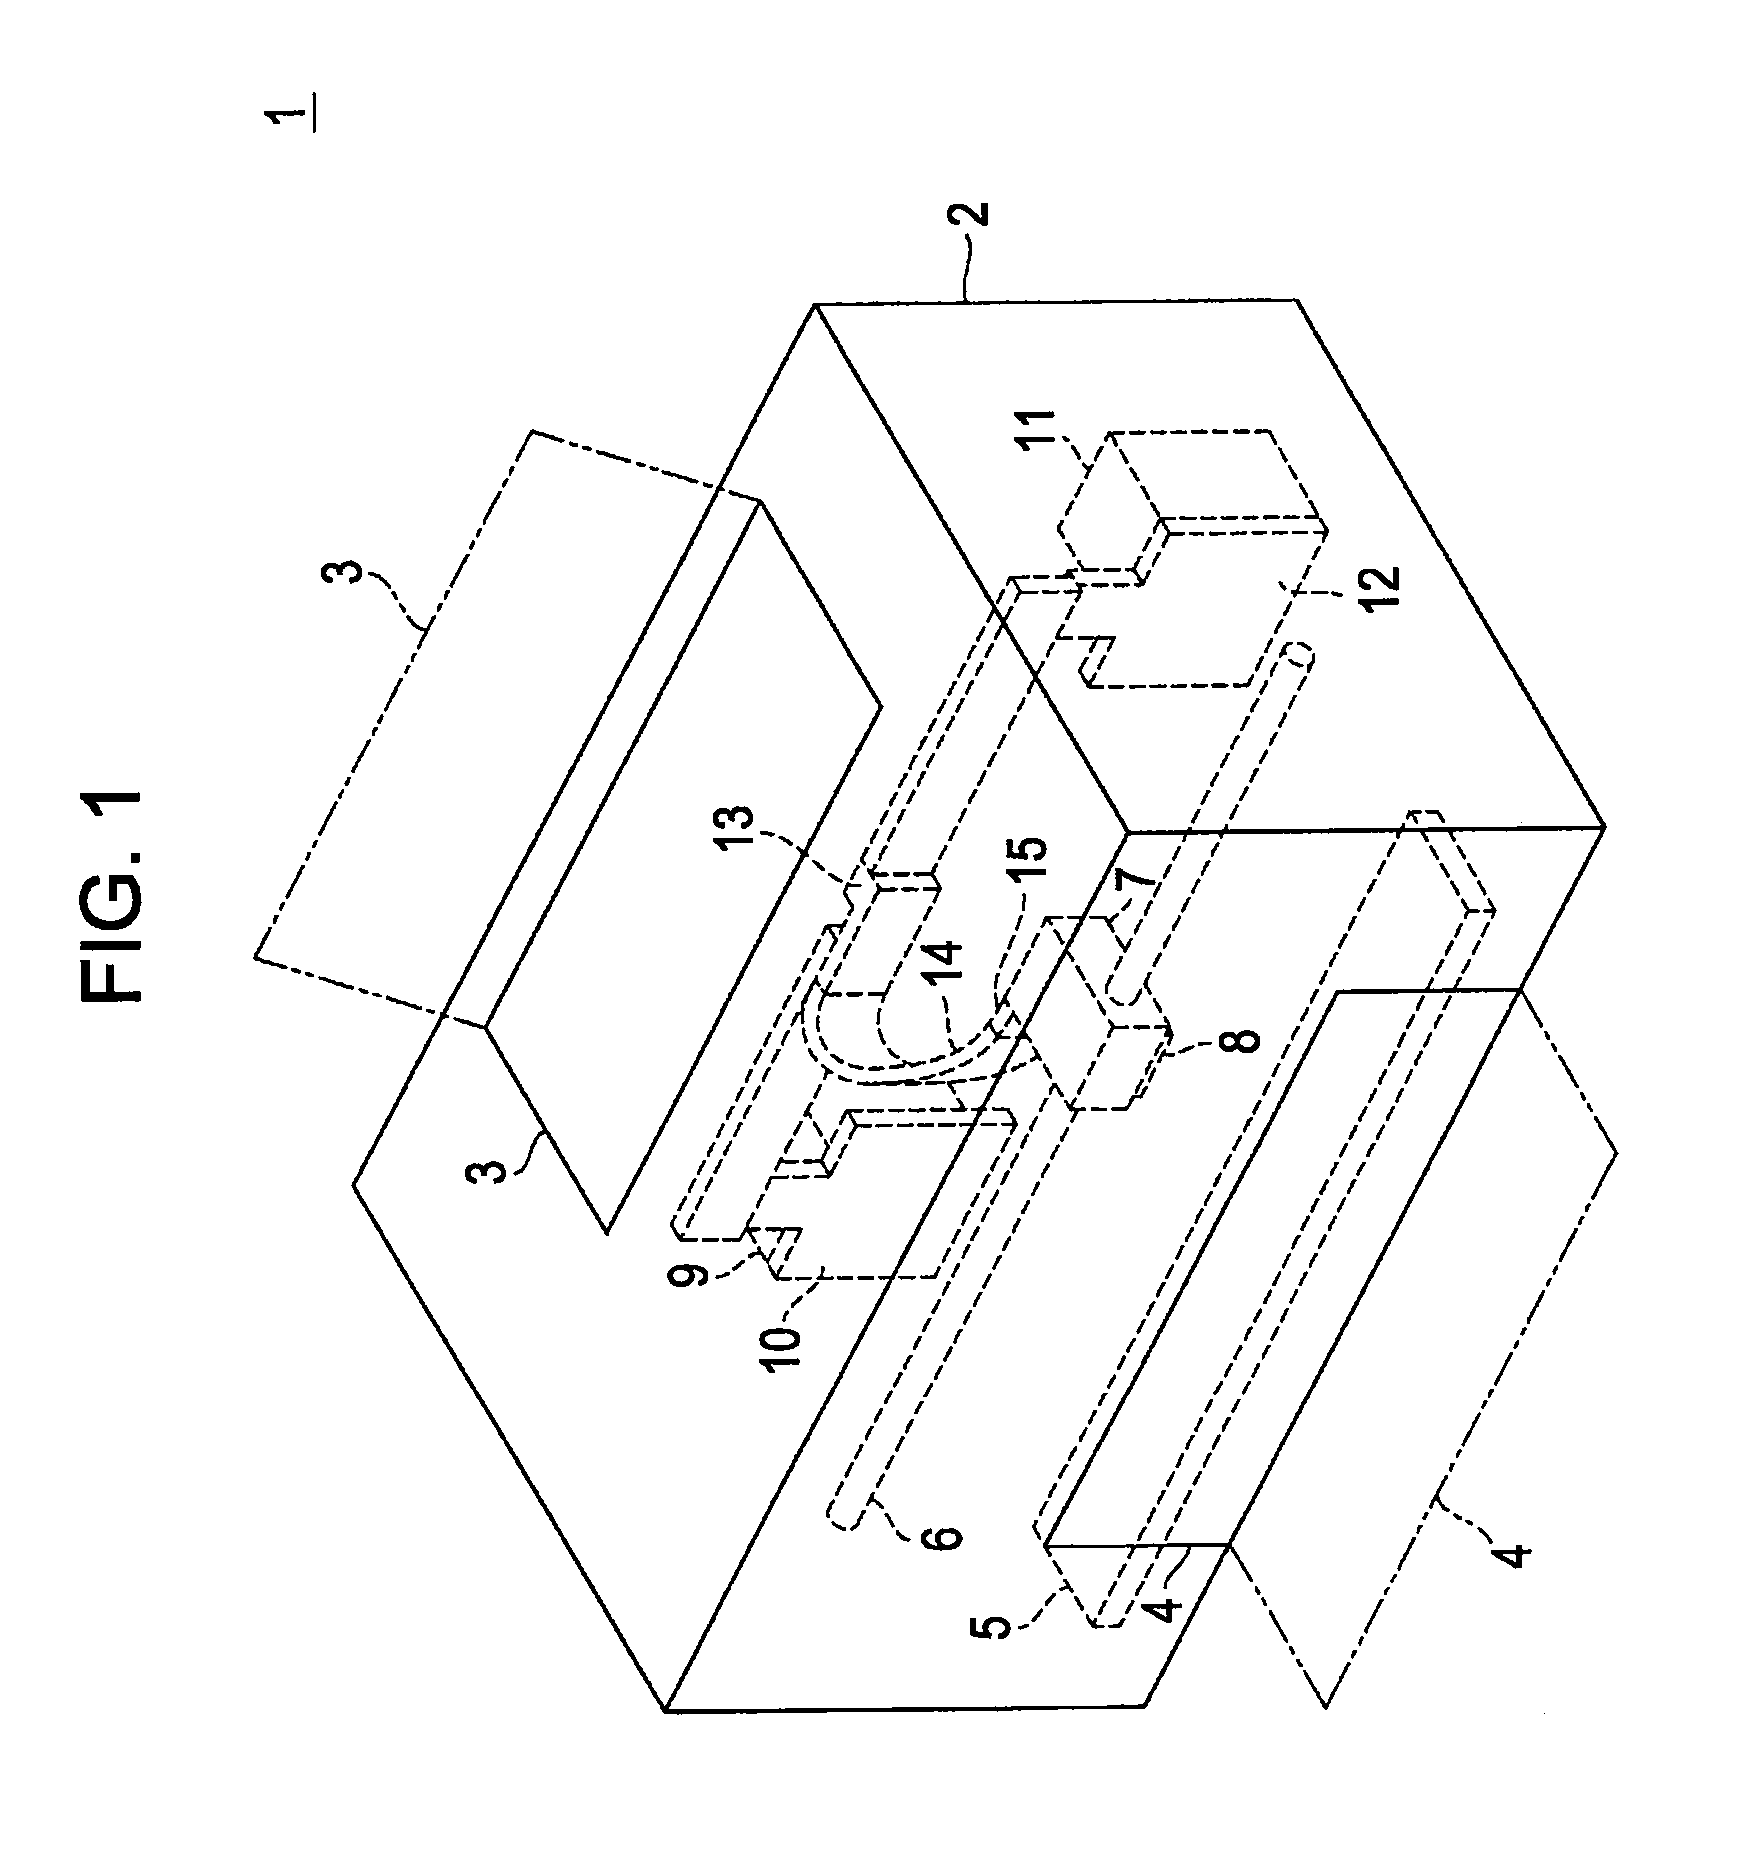 Connector-and-tube assembly and method for forming the same